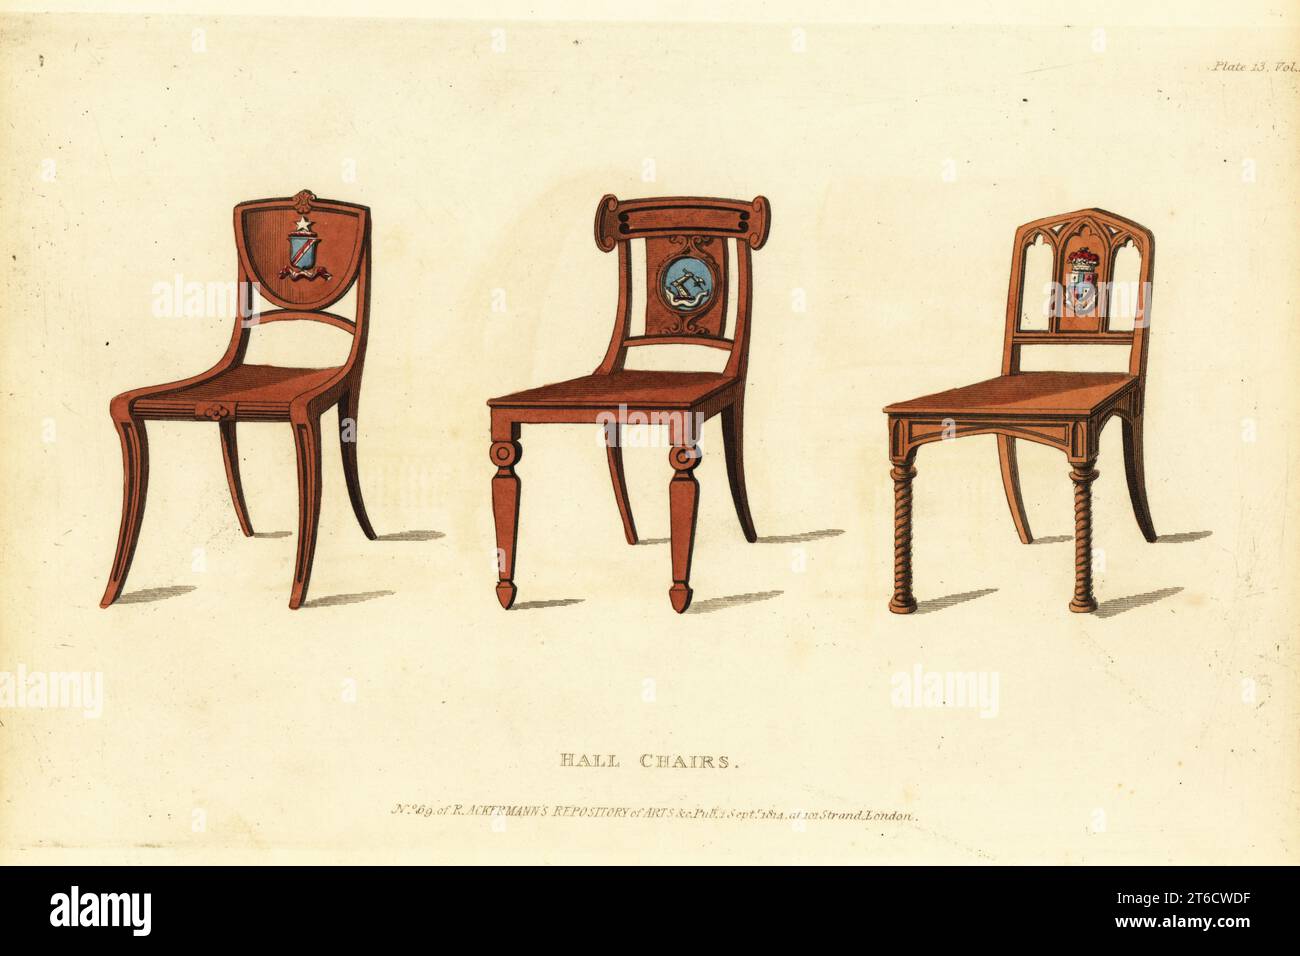 Hall chairs with coats of arms, 1814. Solid mahogany with carved ornaments 1, mahogany with ebony inlay 2, and Gothic style chair in oak 3. Handcoloured copperplate engraving from The Upholsterer's and Cabinet-Maker's Repository consisting of seventy-six designs of modern and fashionable furniture, Rudolph Ackermann, London, 1830. Stock Photo